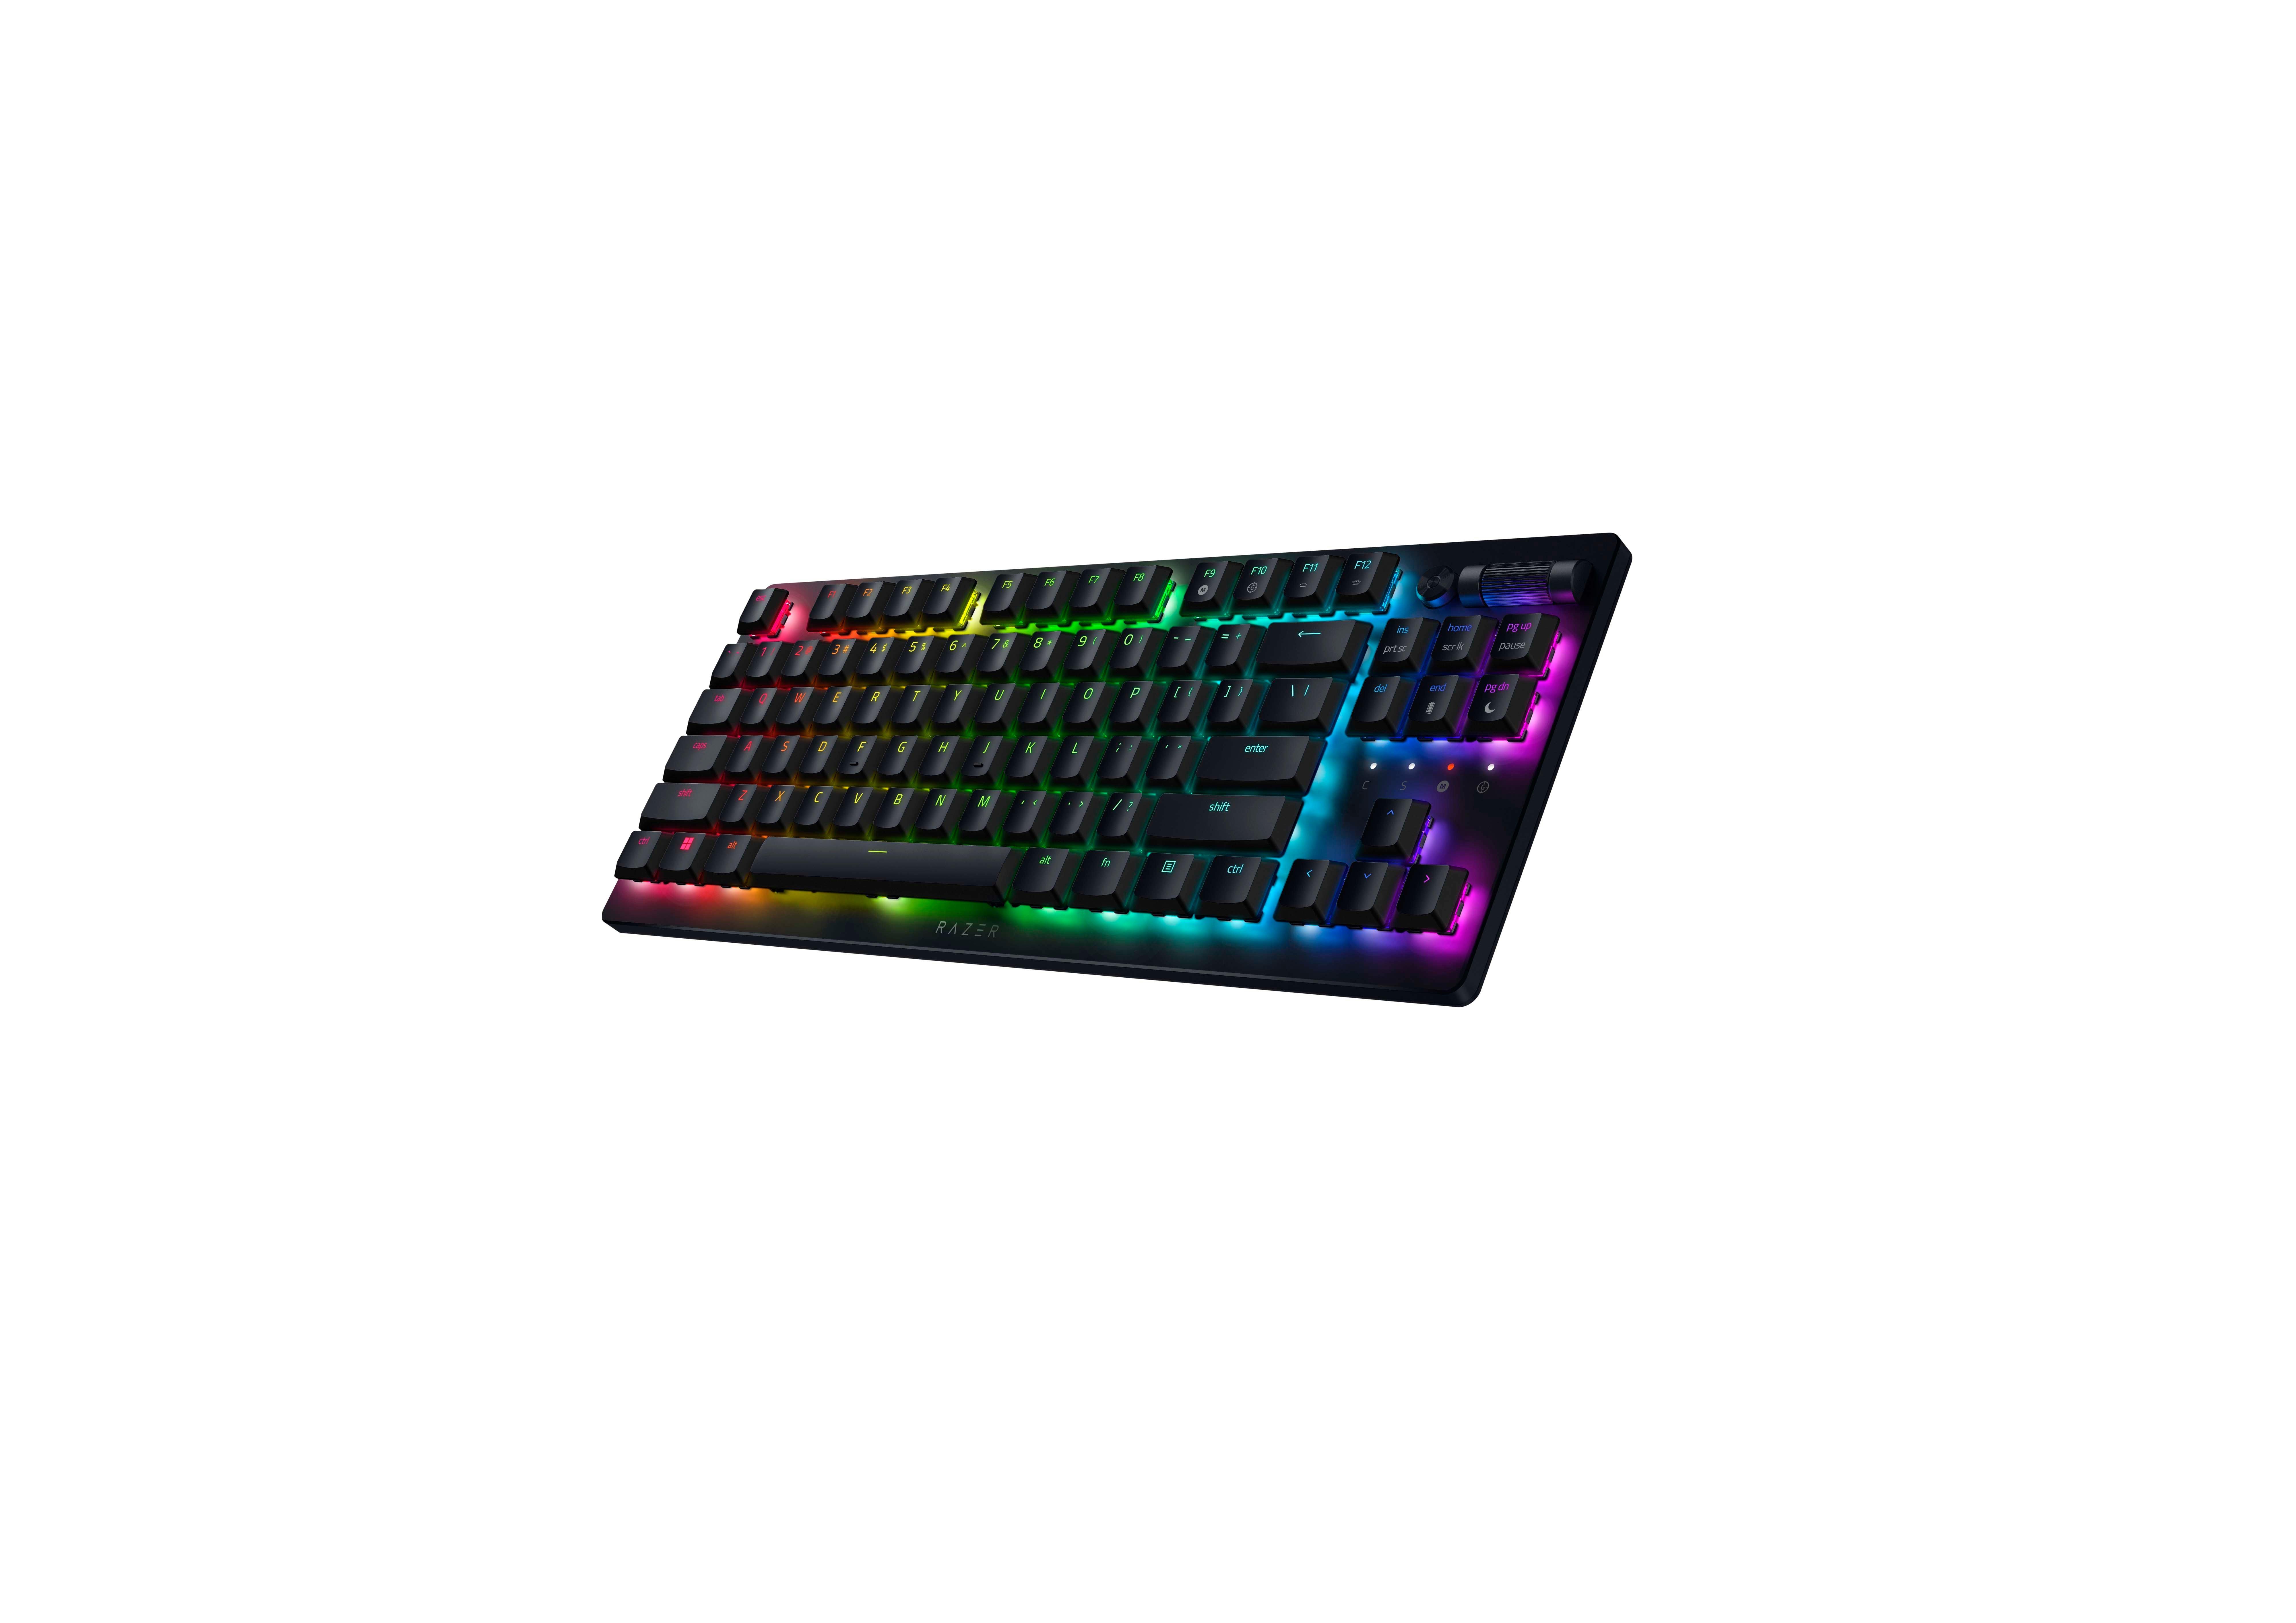 Razer DeathStalker V2 Tenkeyless Wireless Low-Profile Gaming Keyboard with Optical Linear Switches and Chroma RGB Lighting - Black